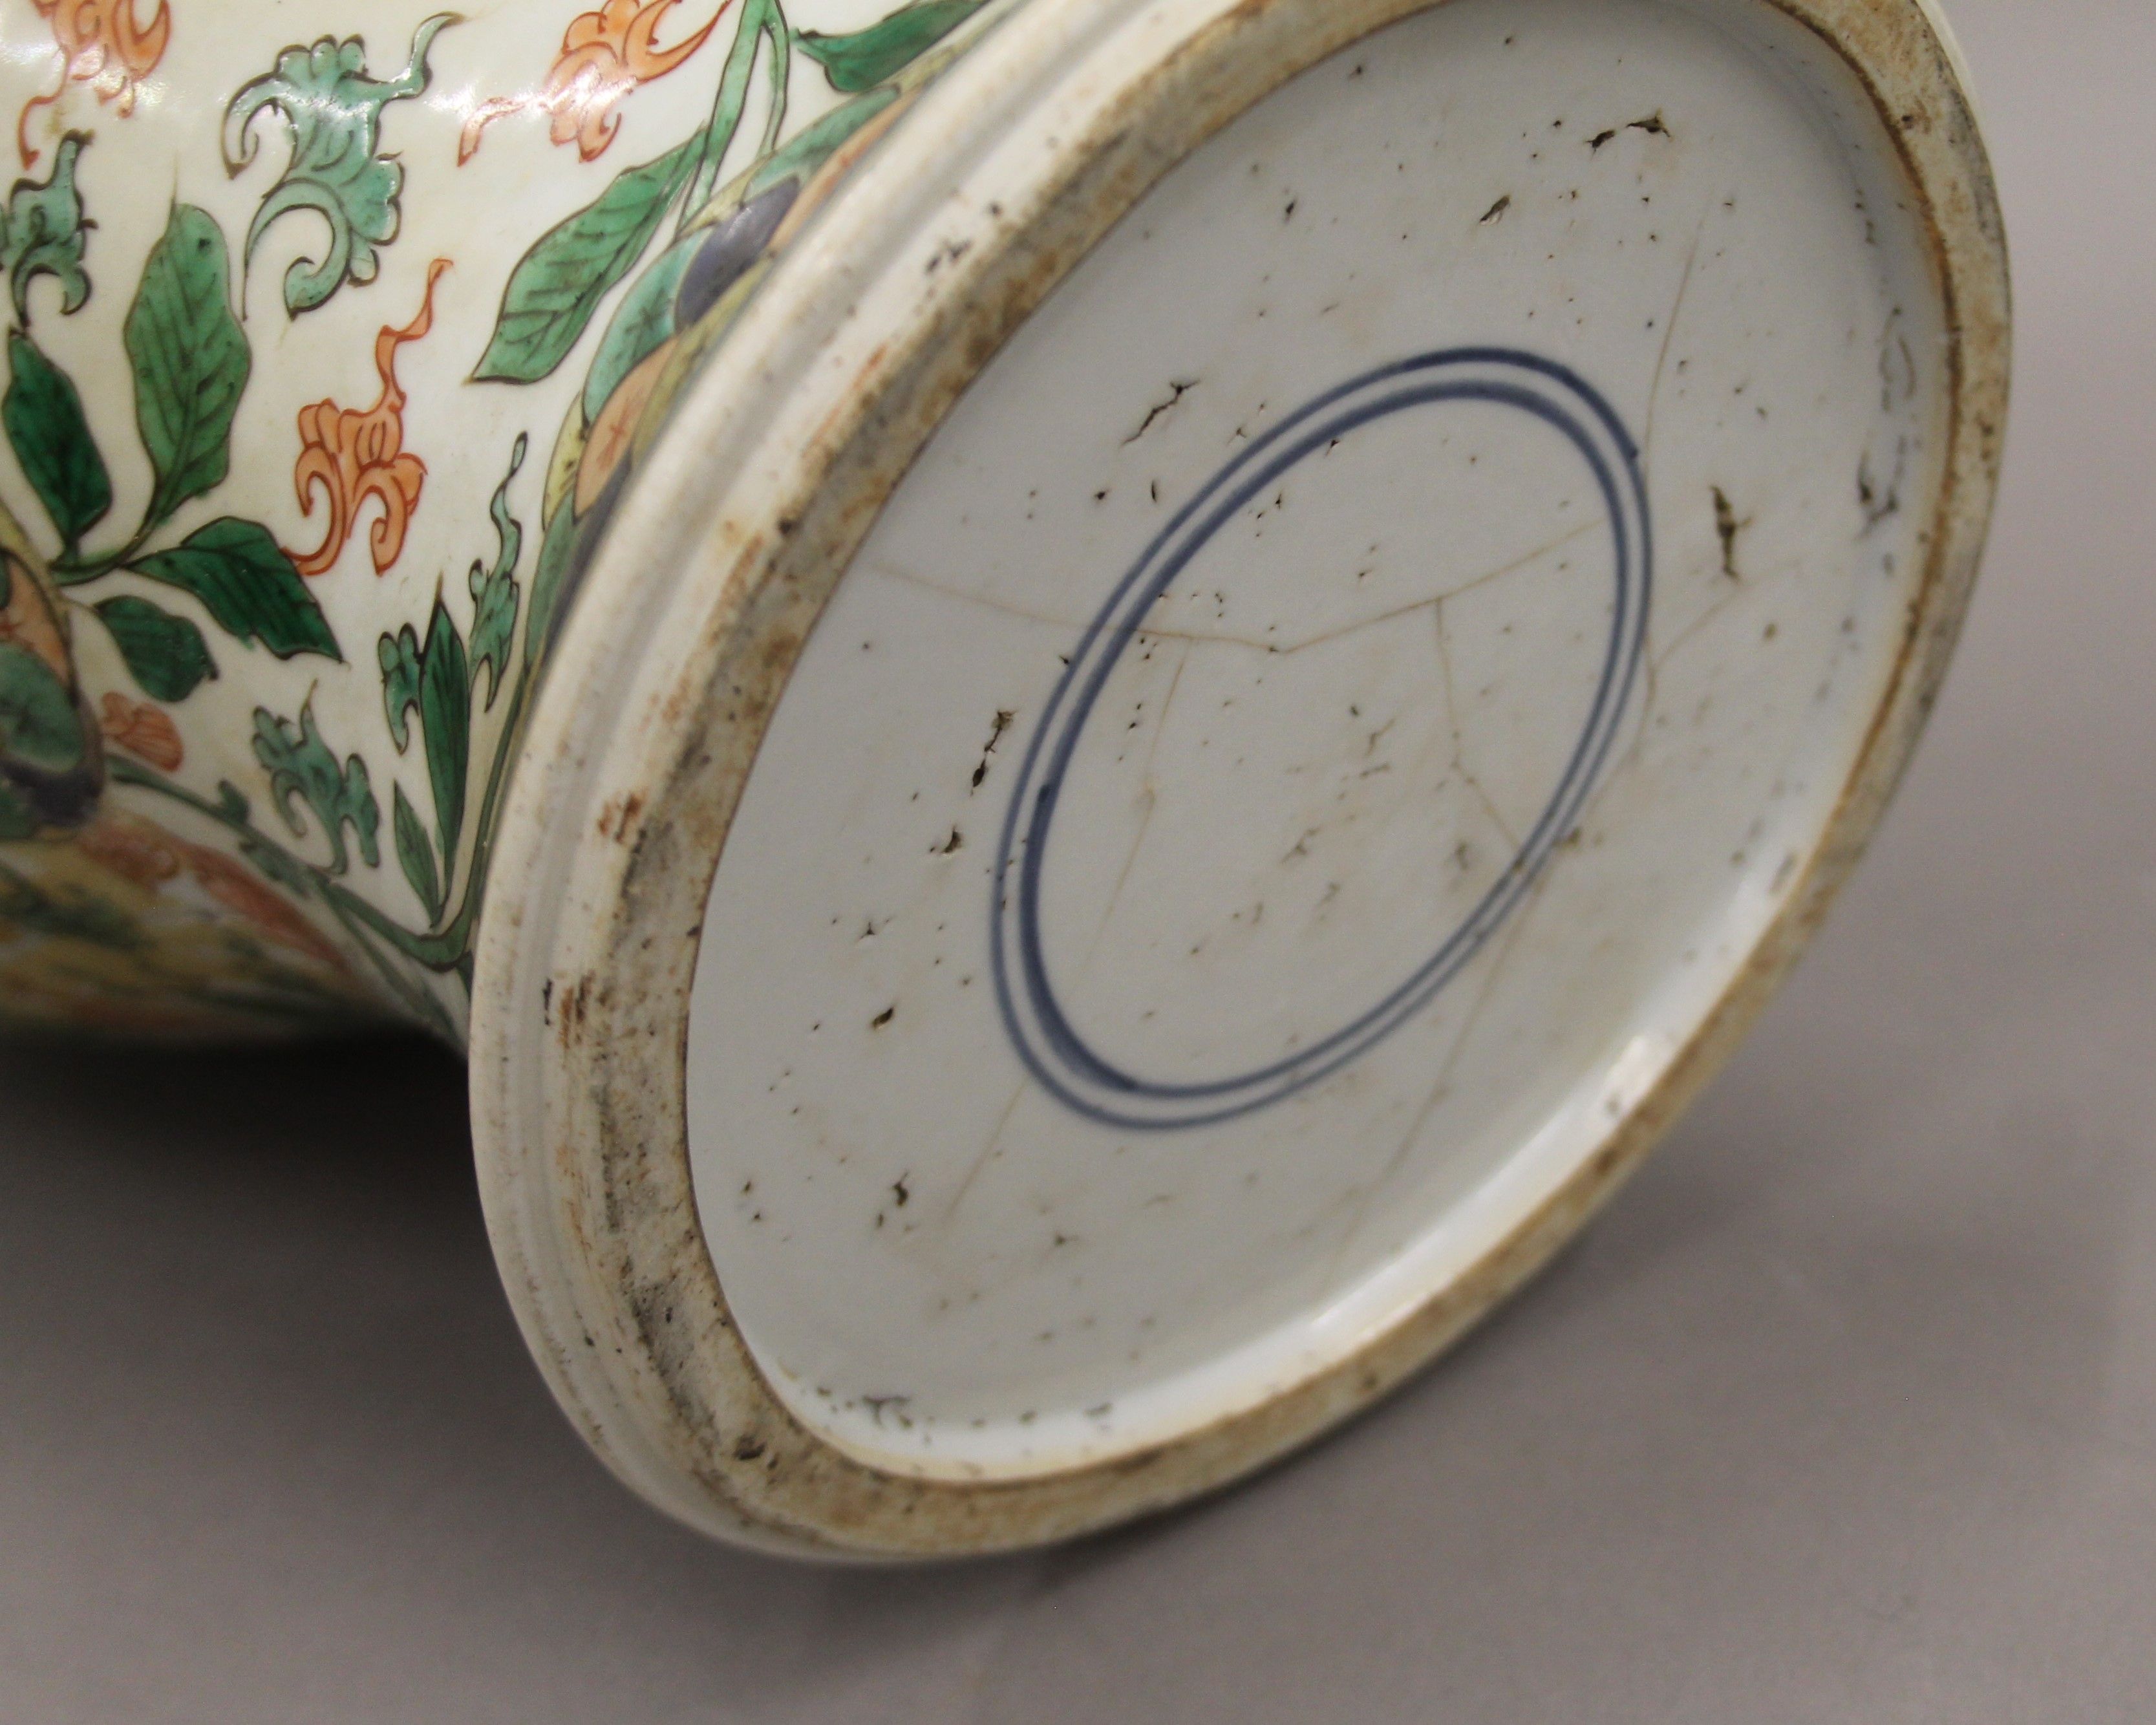 A 18th/19th century Chinese porcelain vase with pierced wooden lid and carved wooden stand. - Image 7 of 8